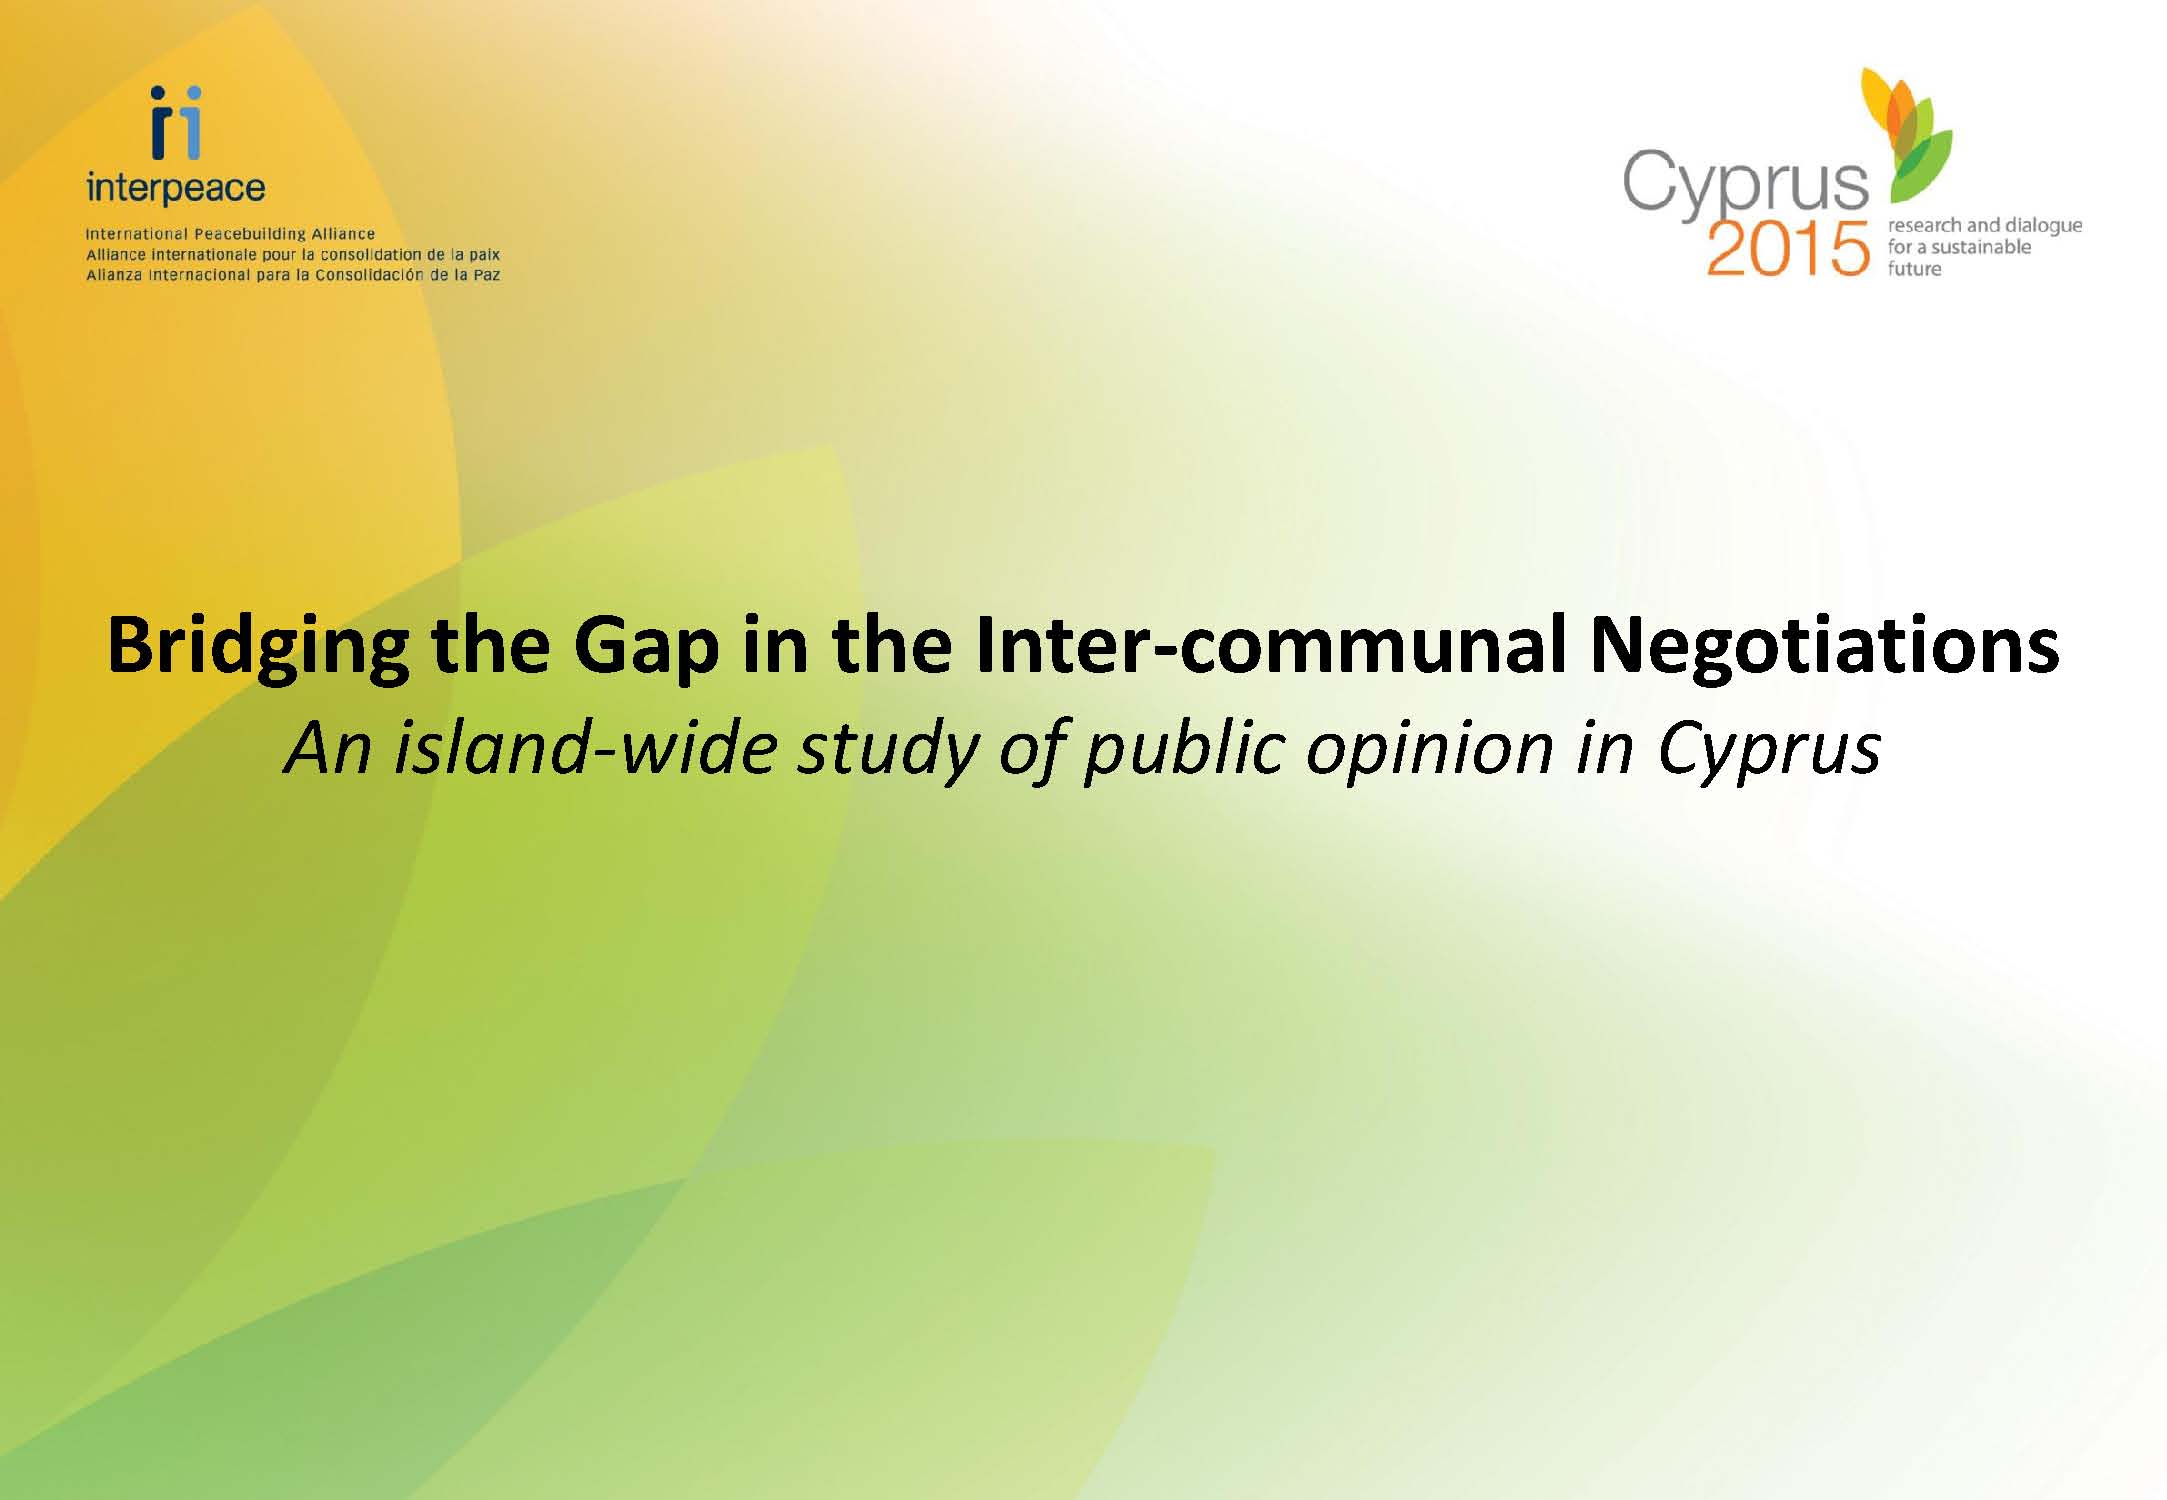 Briding the Gap in the Inter-communal Negotiations